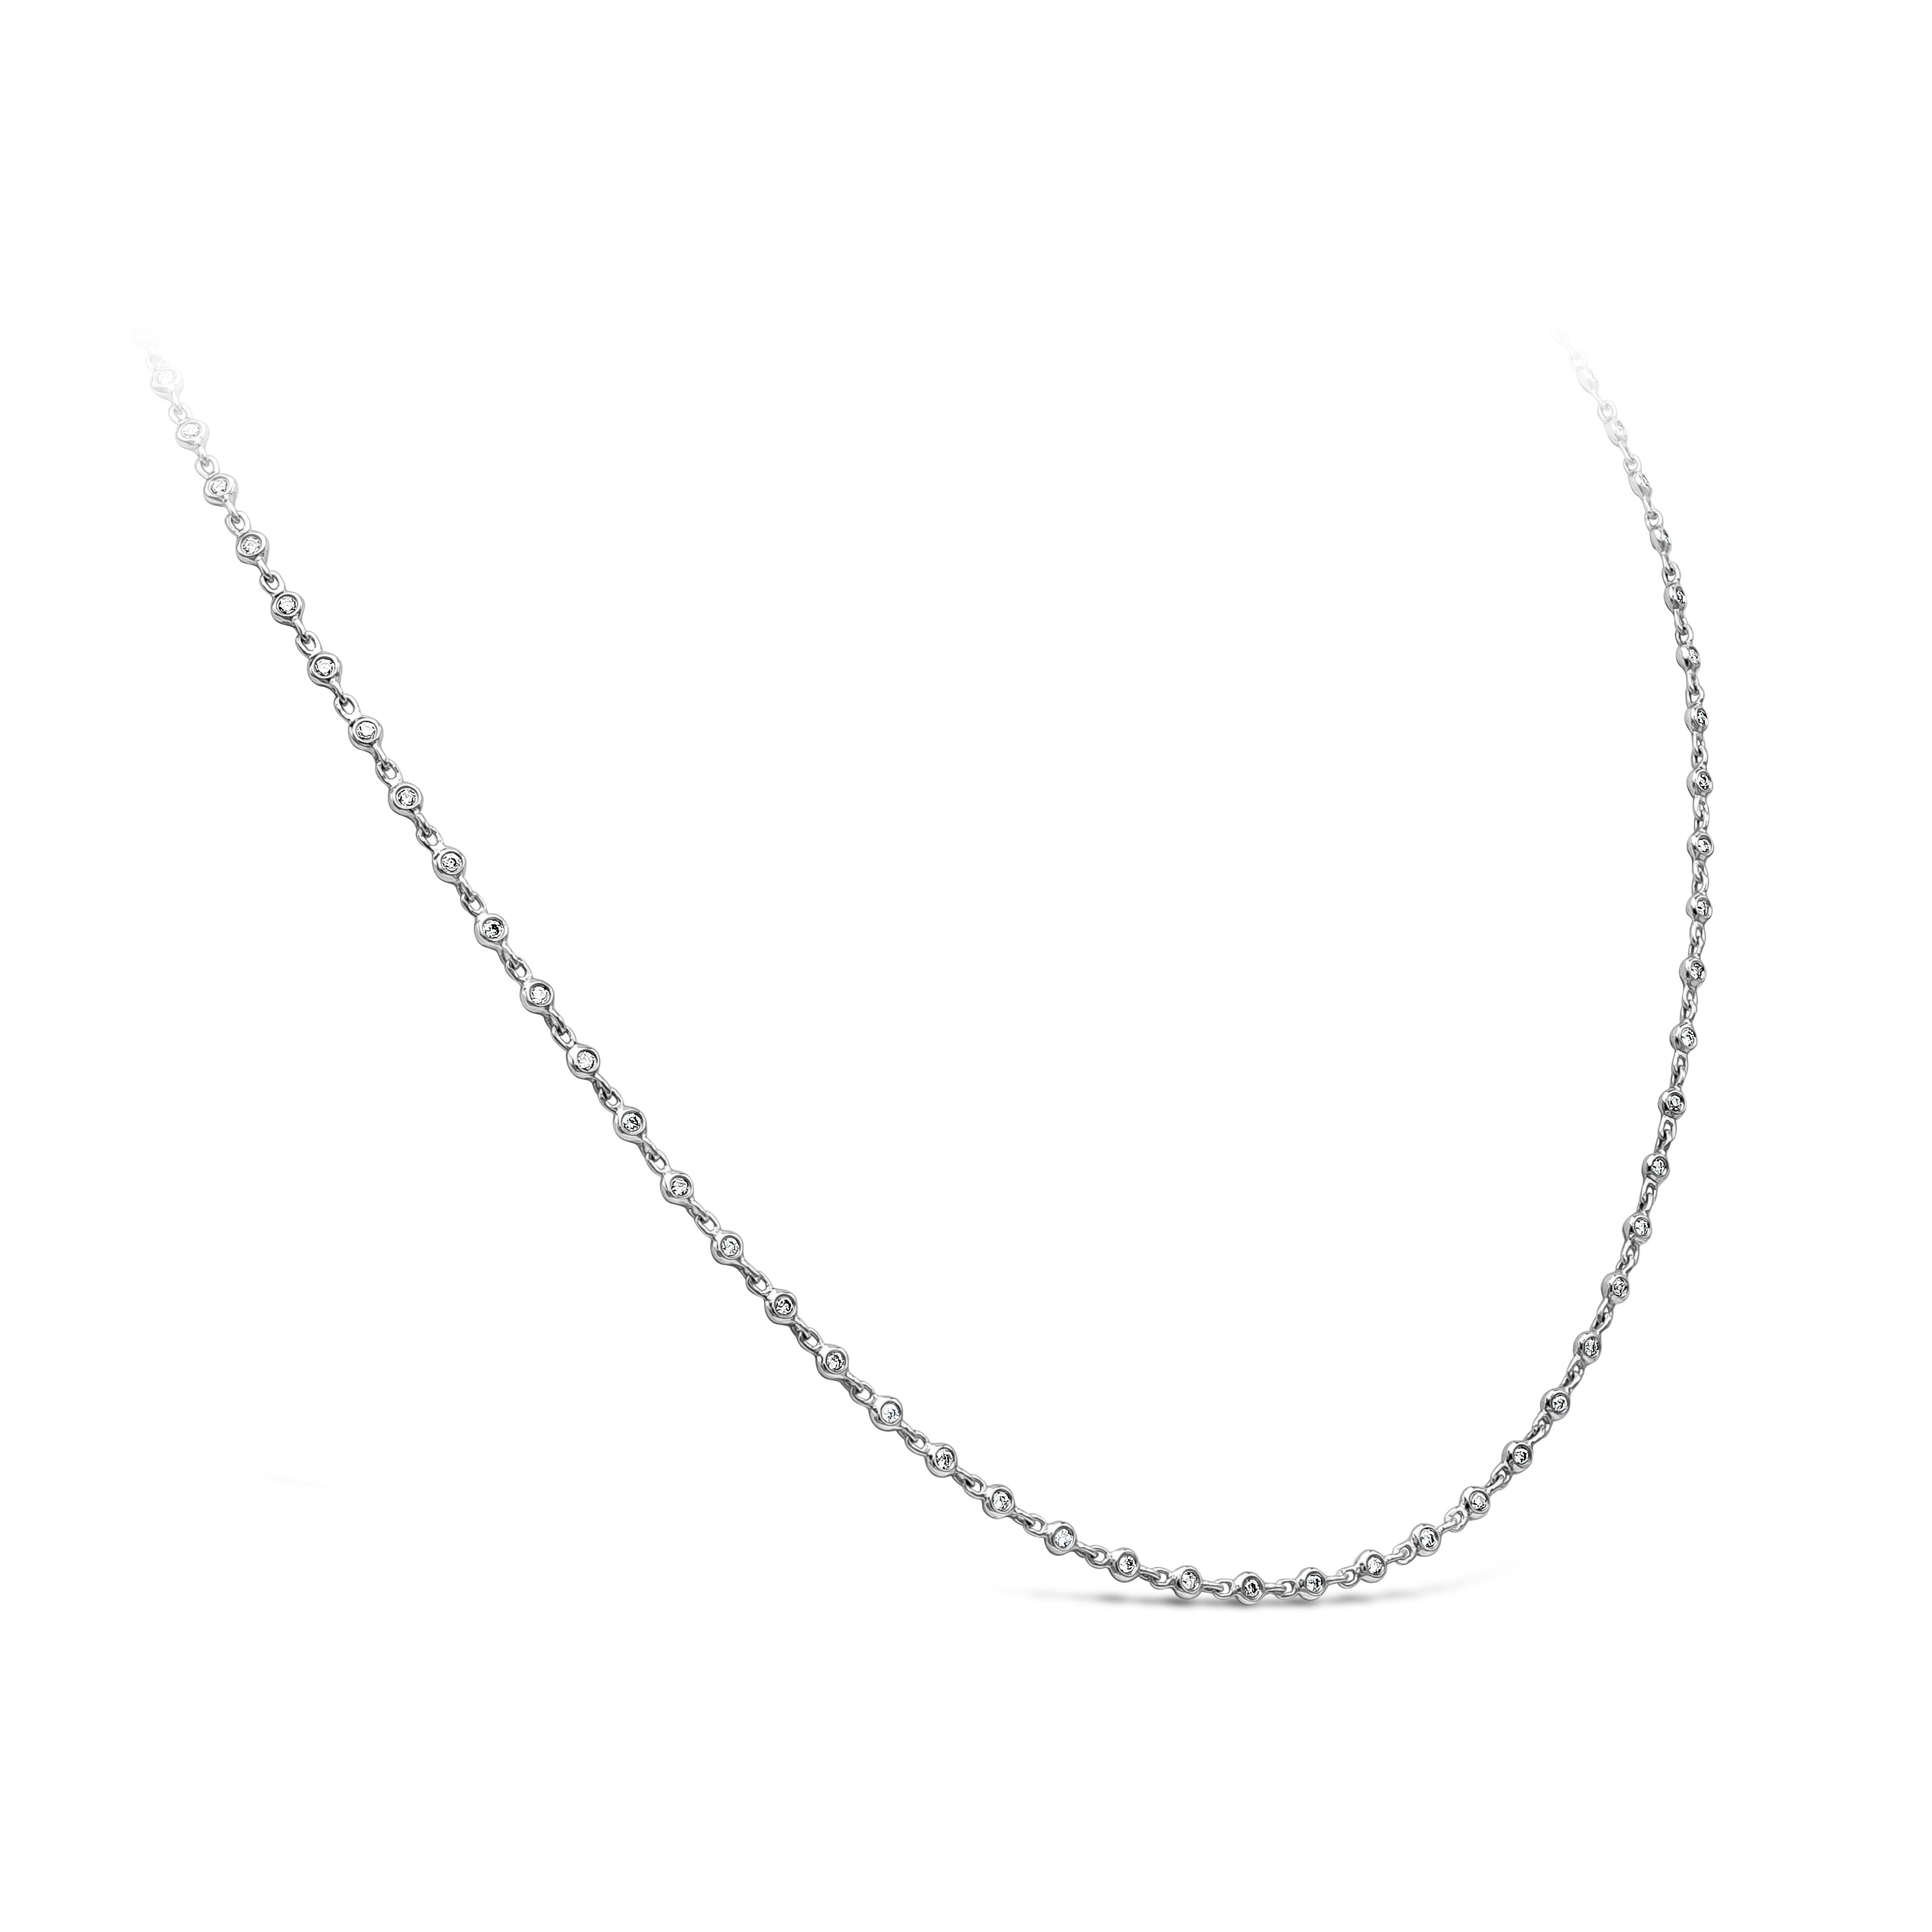 A traditional diamonds by the yard necklace showcasing necklace is bezel set with round diamonds and little space in between each diamond for maximum brilliance. Diamonds weigh 0.62 carats total. Made in 18k white gold.

Style available in different